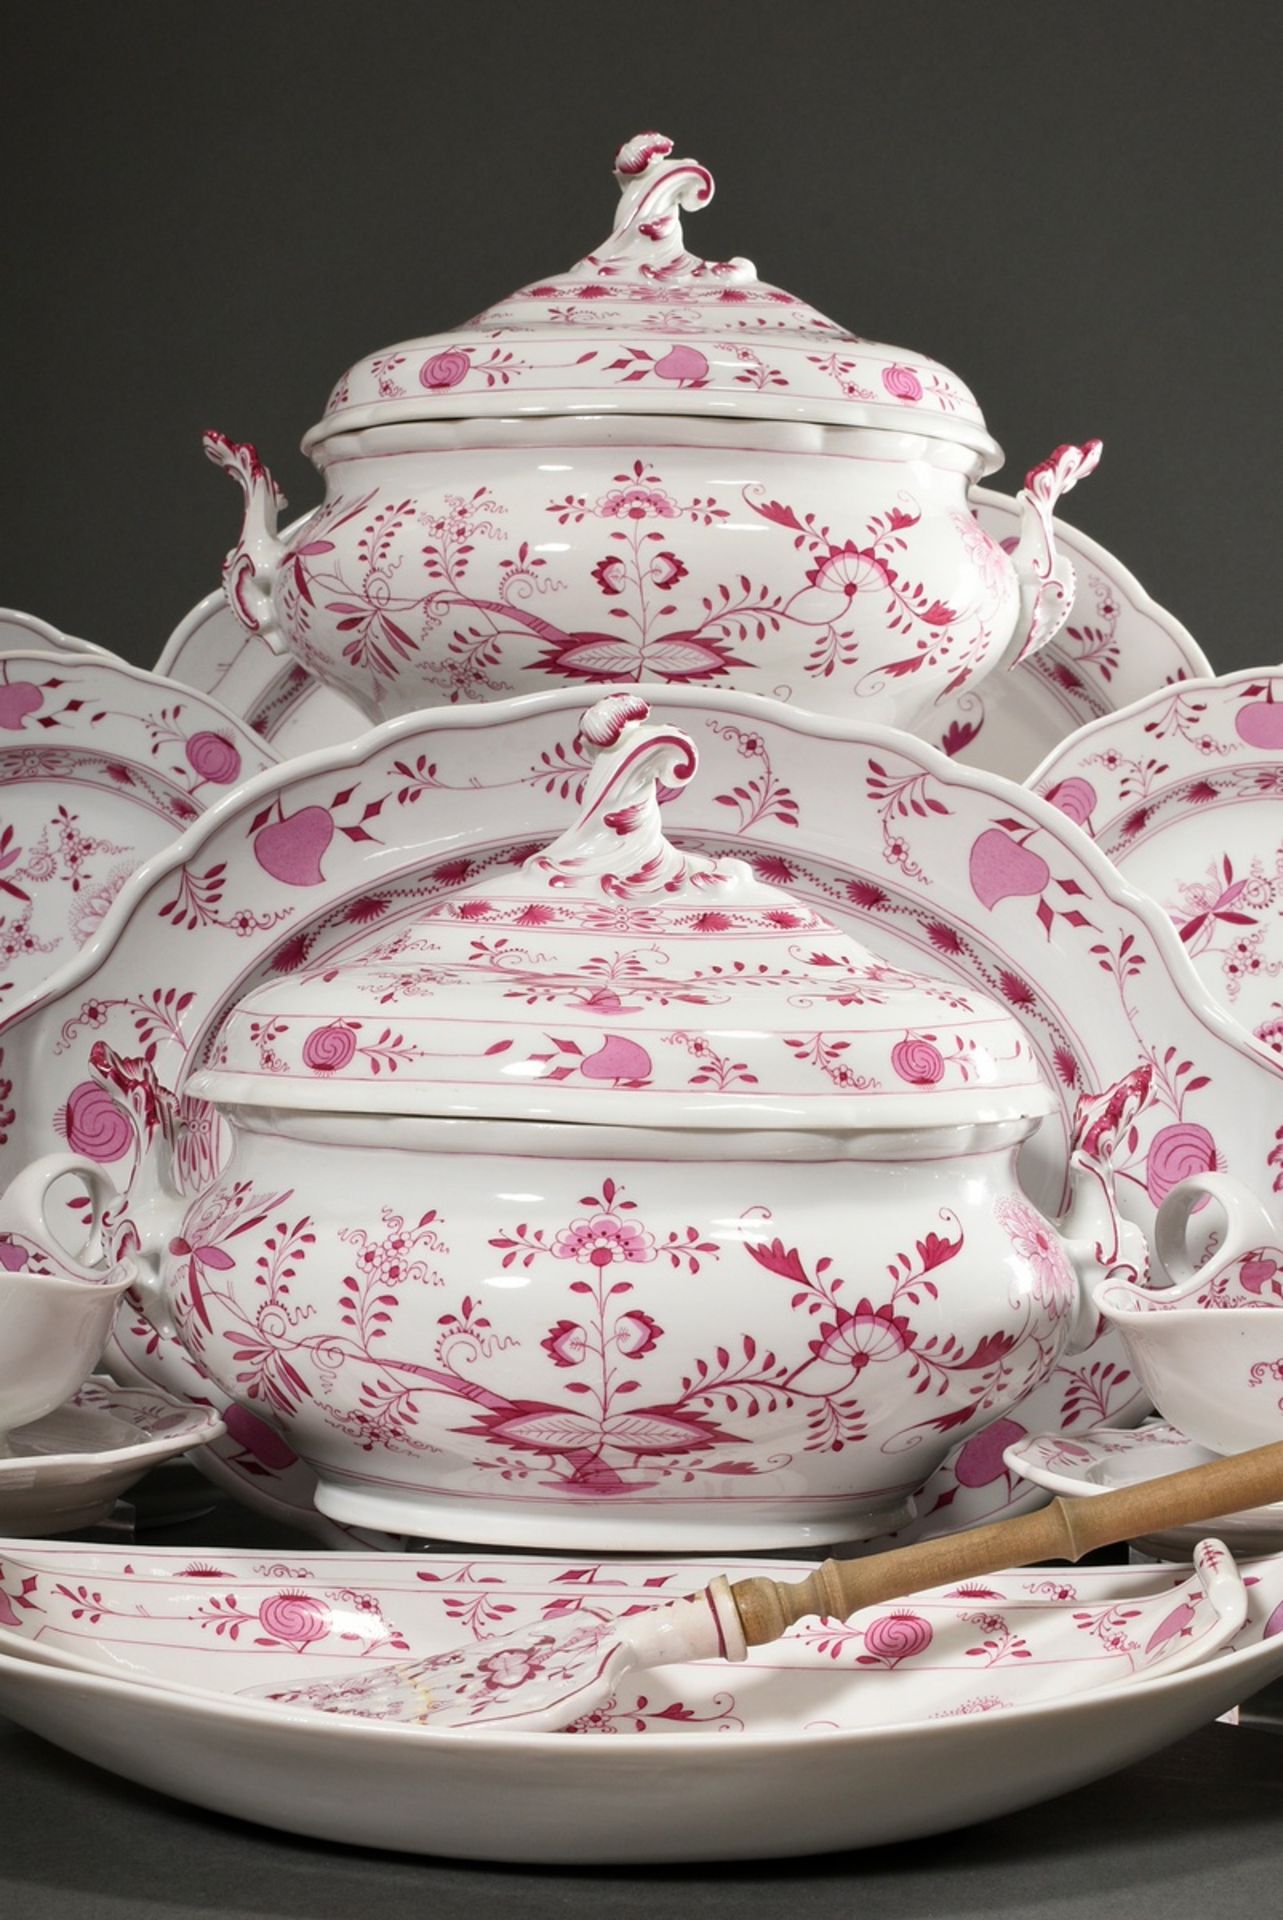 65 Pieces rare Meissen dinner service "Zwiebelmuster Pink", custom made around 1900, consisting of: - Image 13 of 27